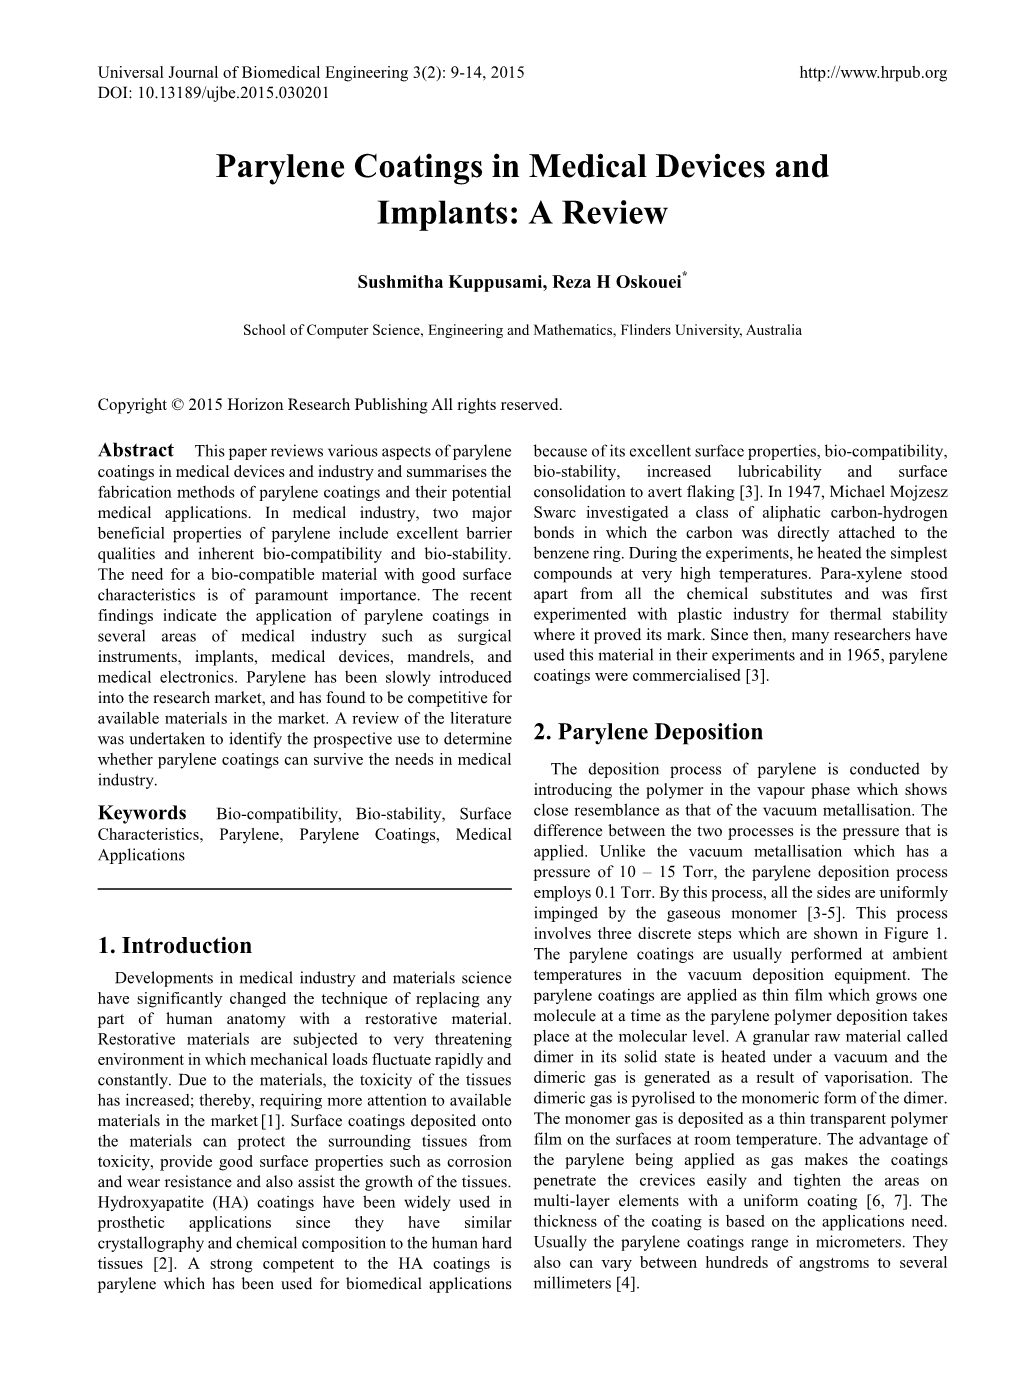 Parylene Coatings in Medical Devices and Implants: a Review